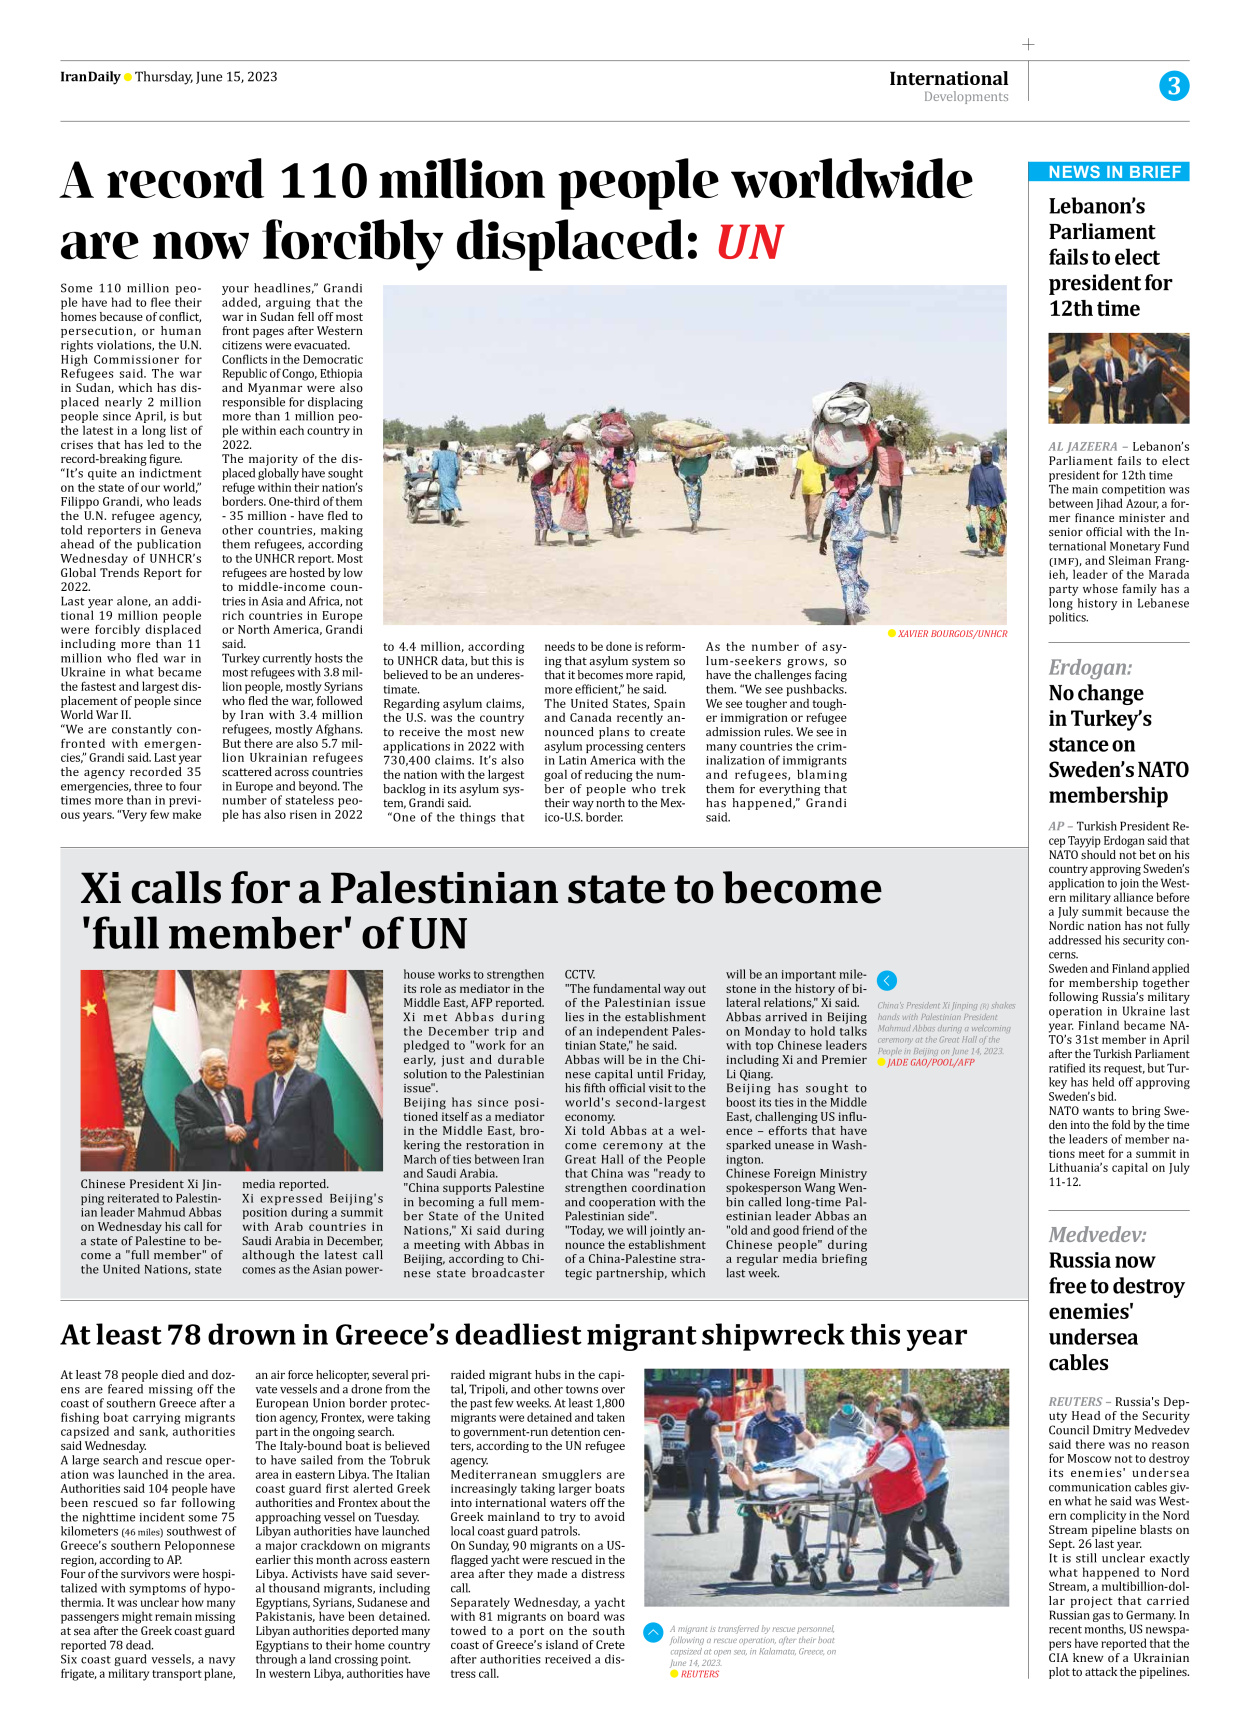 Iran Daily - Number Seven Thousand Three Hundred and Fifteen - 15 June 2023 - Page 3